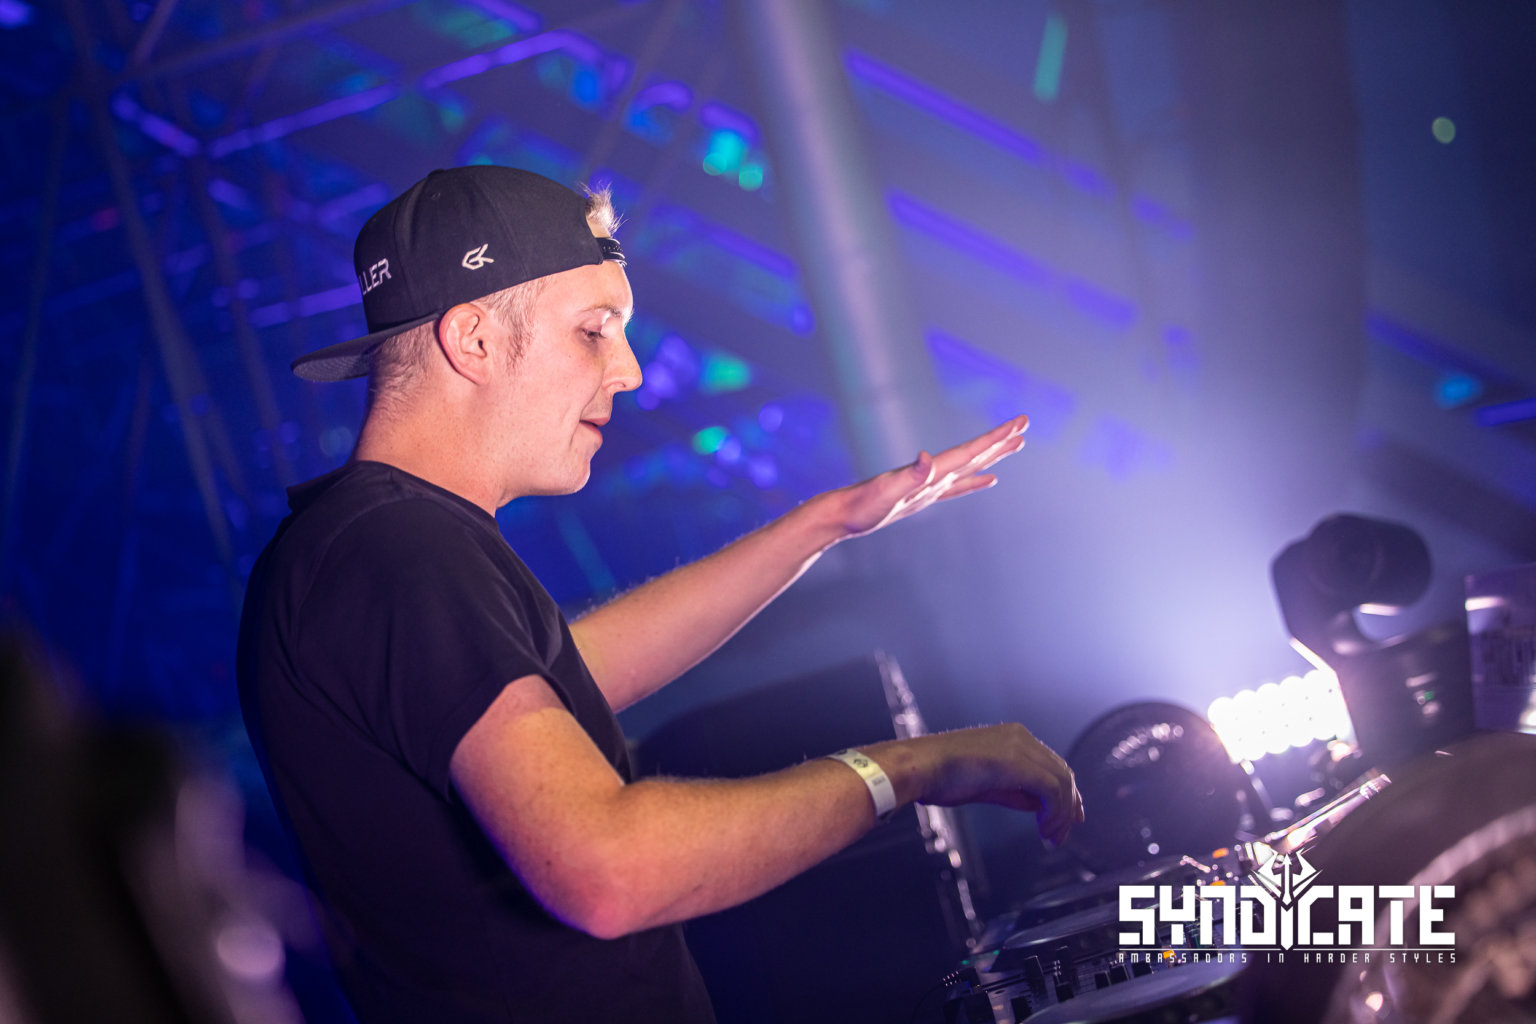 Check the Gridkiller at SYNDICATE 2022 liveset here!